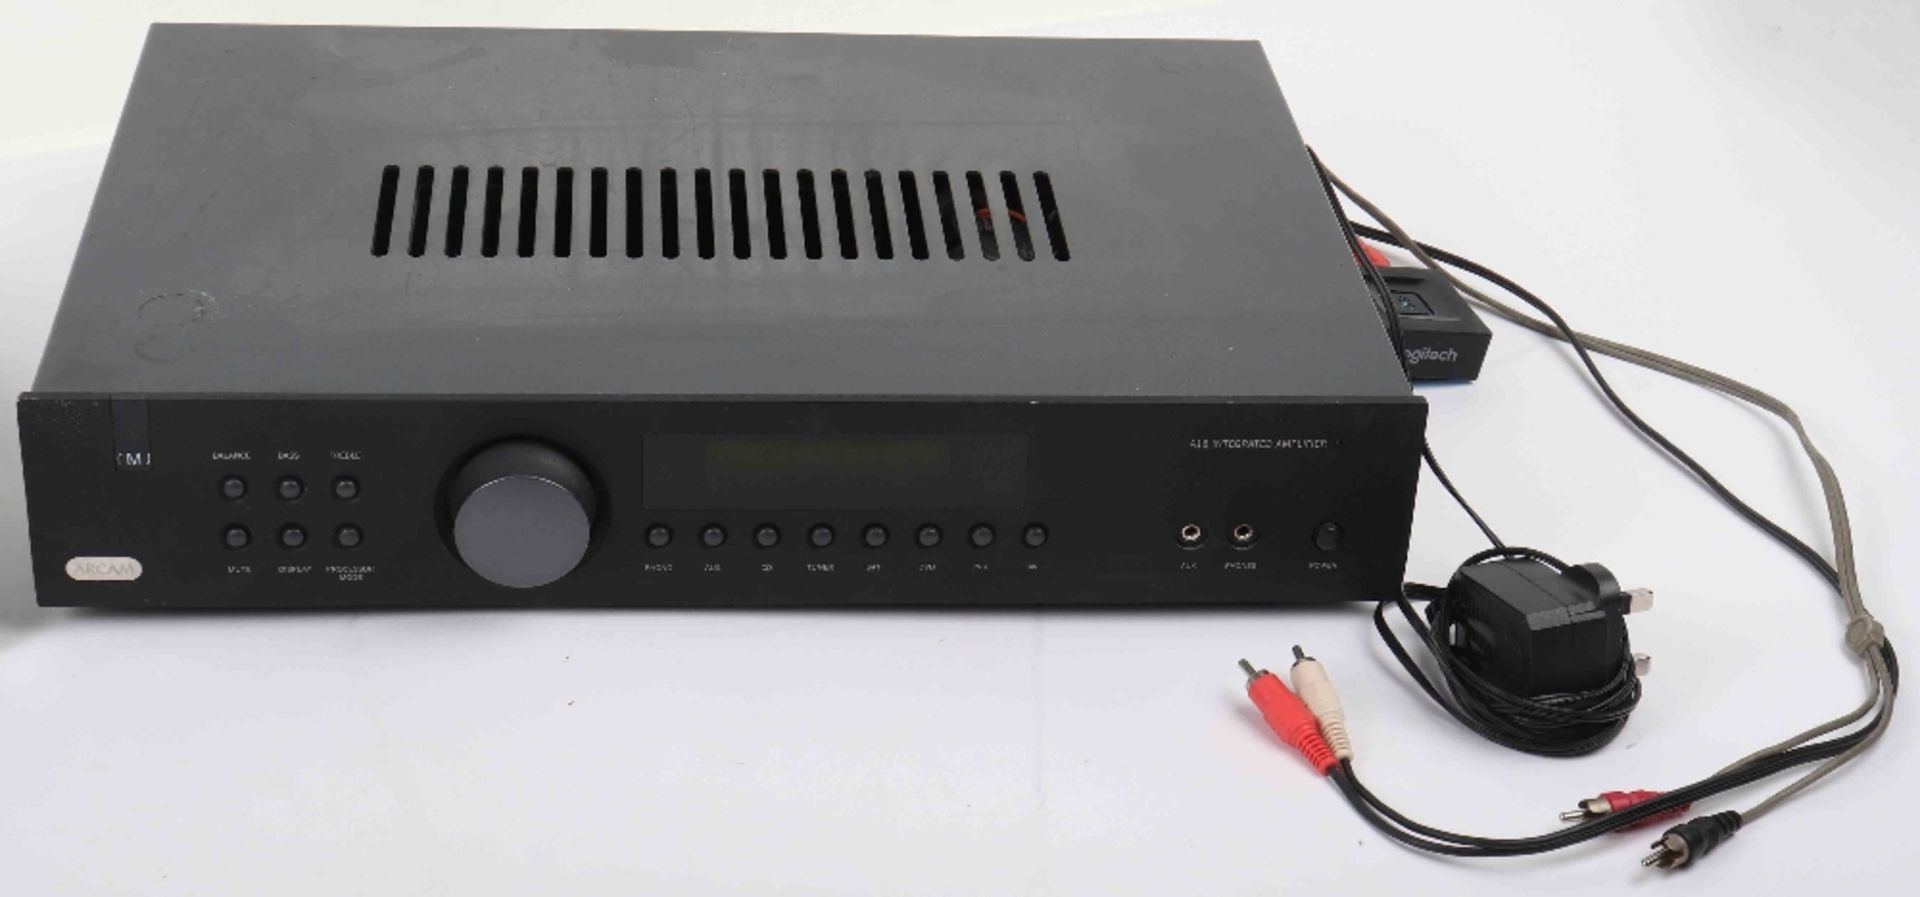 An Arcam A18 Integrated Amplifier, with an Arcam CD17 Compact Disc Player - Image 3 of 6